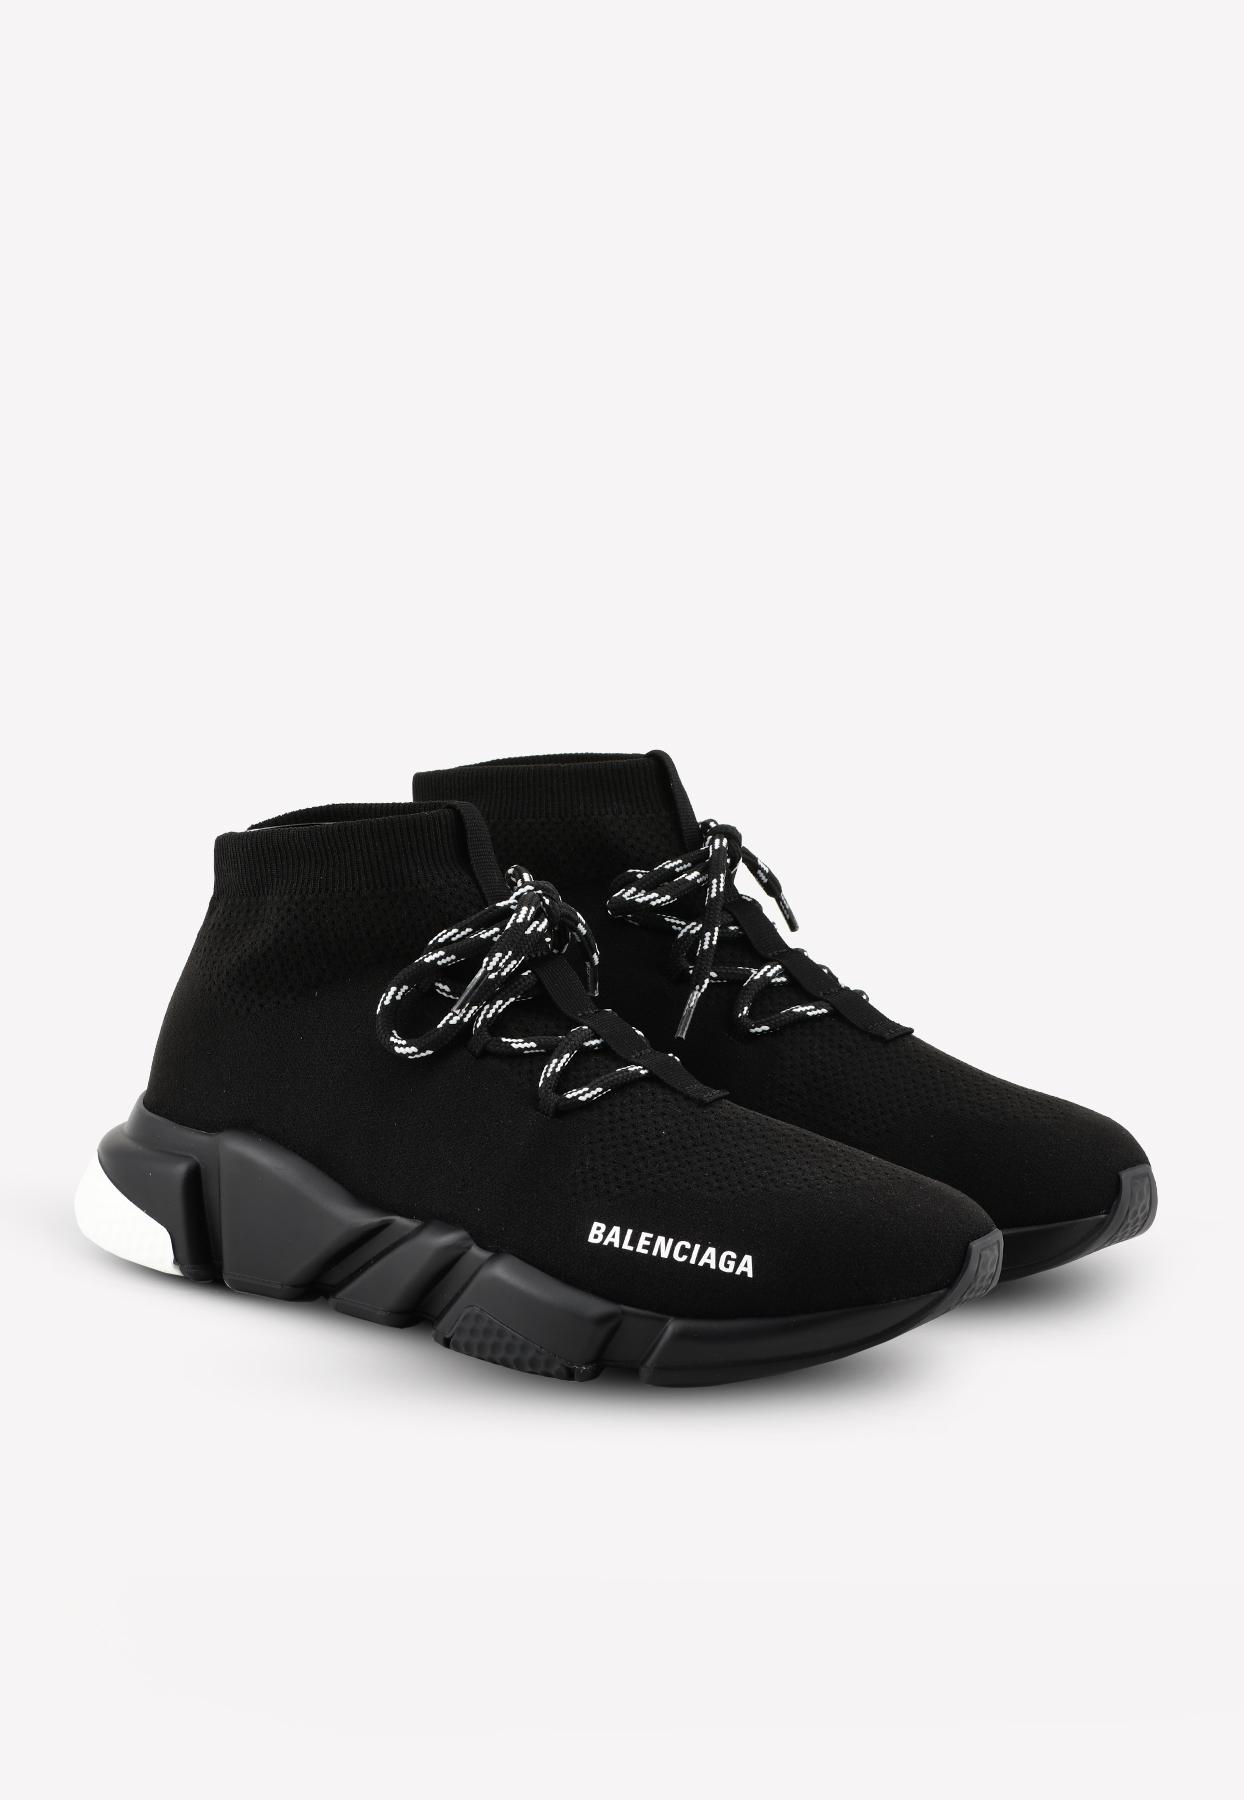 Balenciaga Synthetic Speed Lace-up Sock Sneakers in Black/White (Black ...